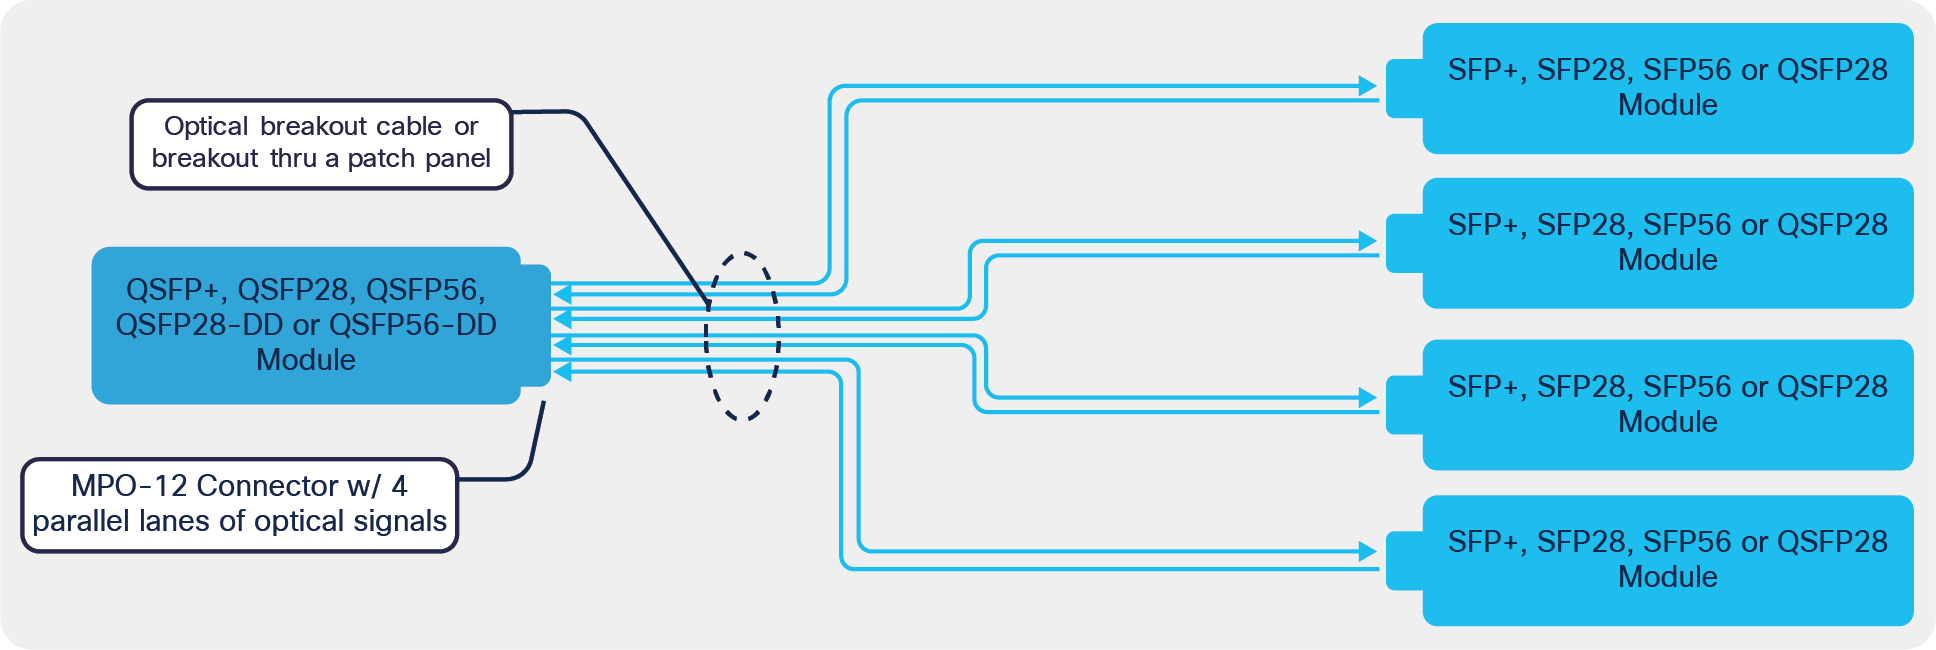 Switch with single-lane downlinks